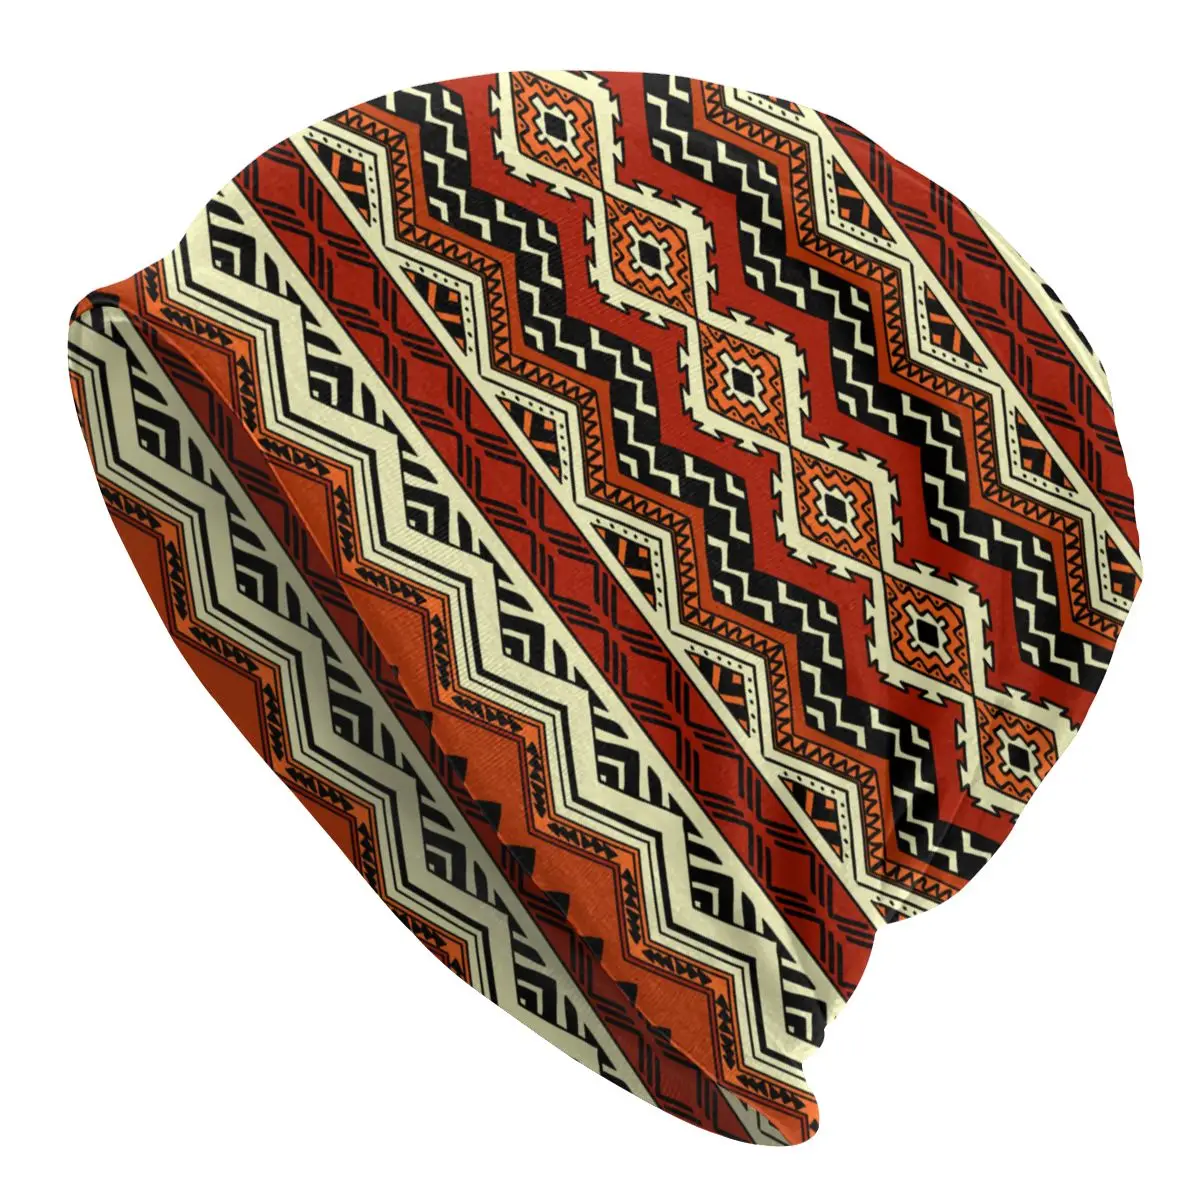 Africa Ethnic Abstract Geometric Ornate Tribal Men's Beanies for Women Outdoor Bonnet Hats Unisex Knitted Hat Hip Hop Cap